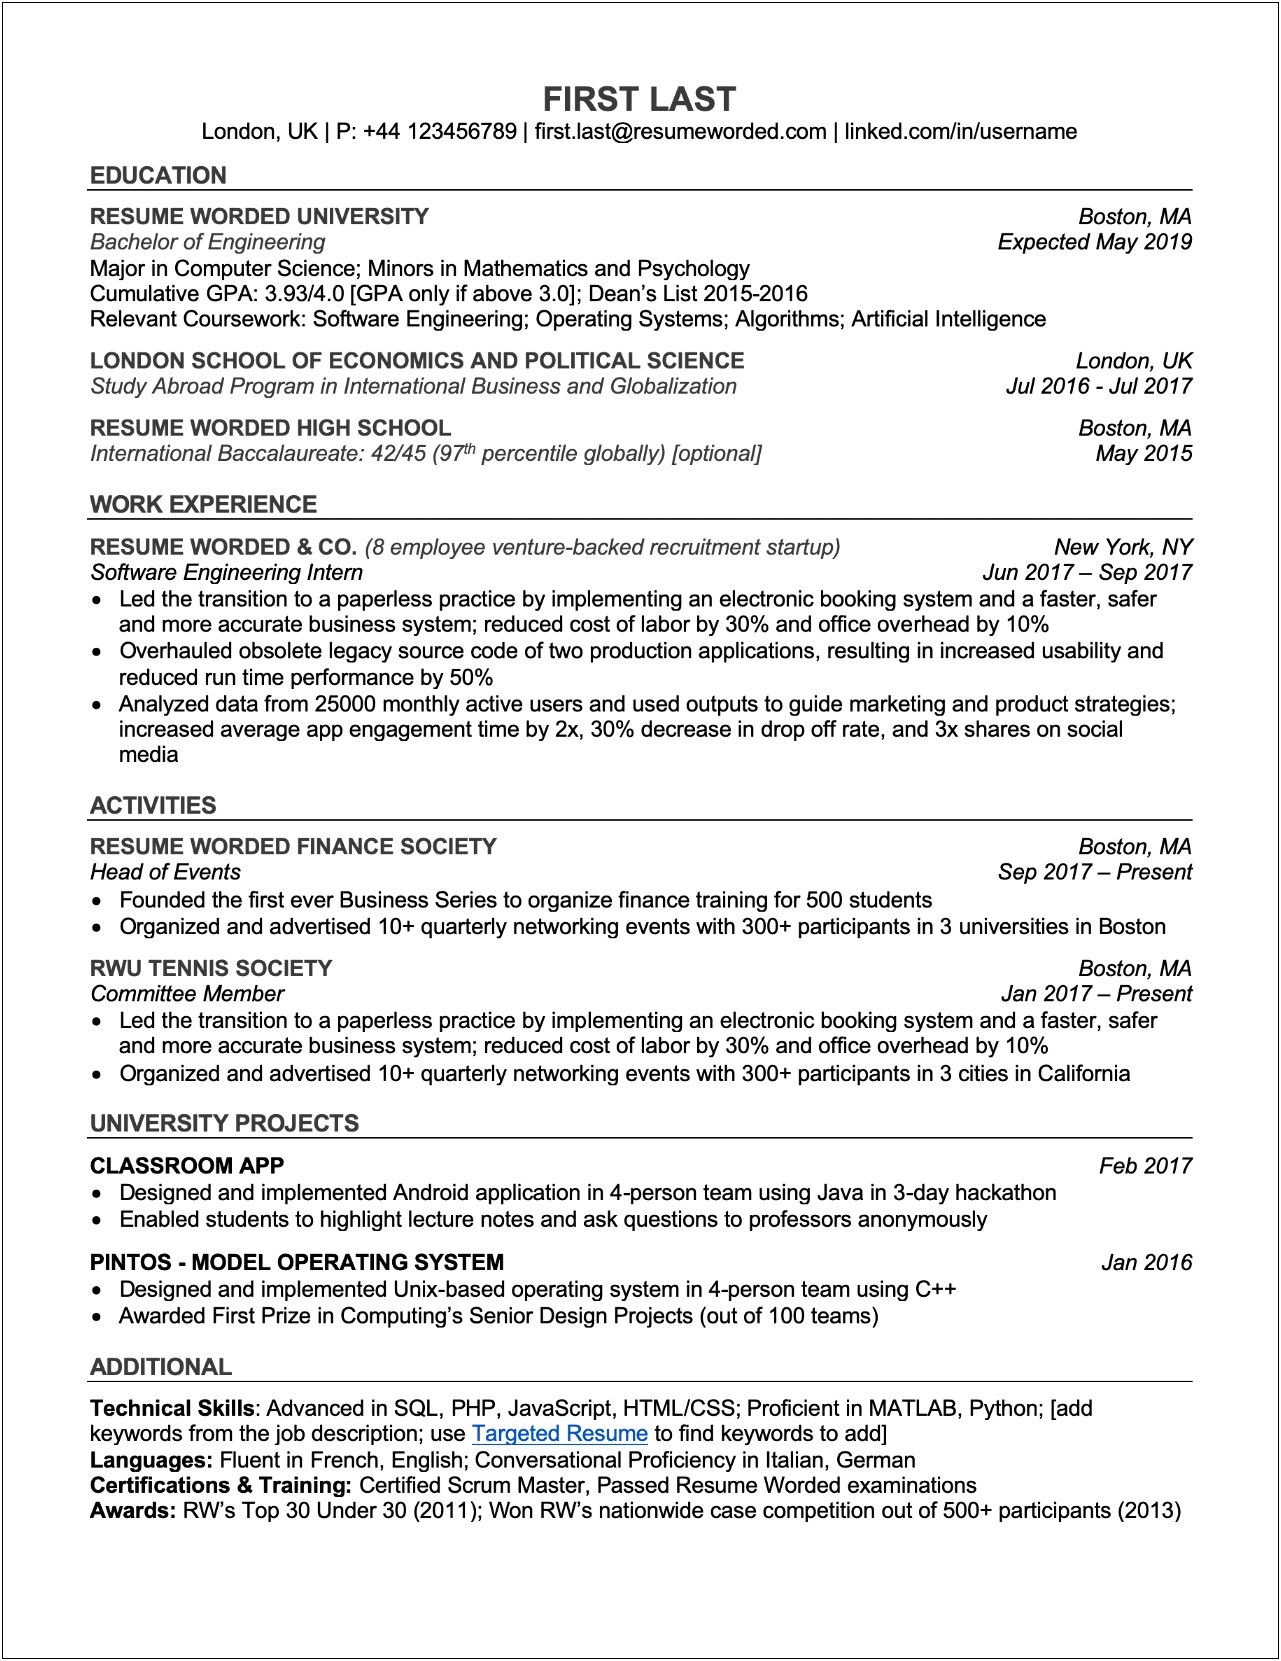 Developed Case Notes Example On Resume